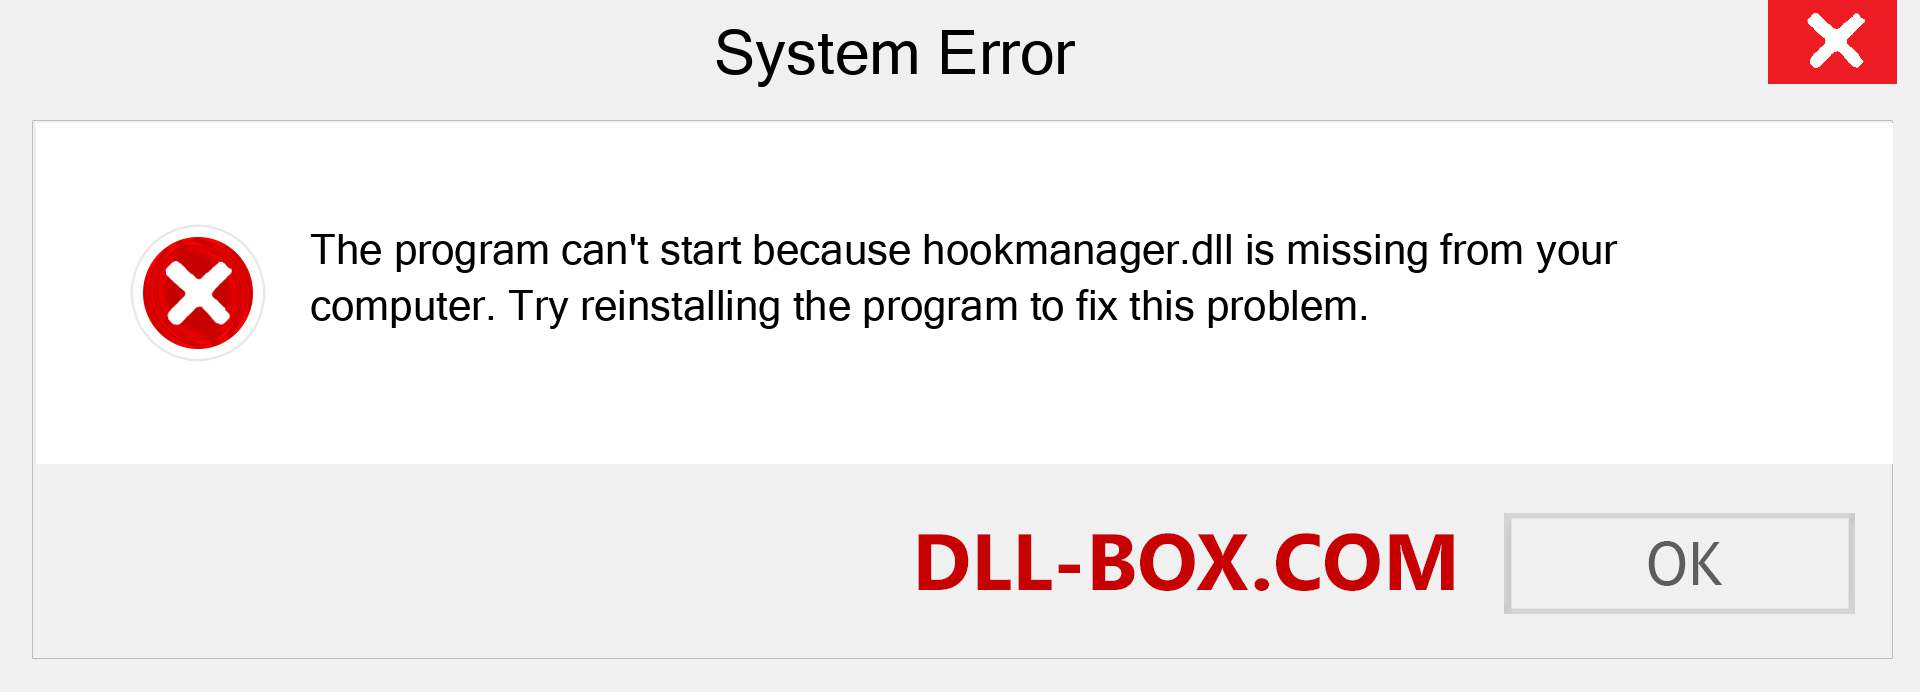  hookmanager.dll file is missing?. Download for Windows 7, 8, 10 - Fix  hookmanager dll Missing Error on Windows, photos, images